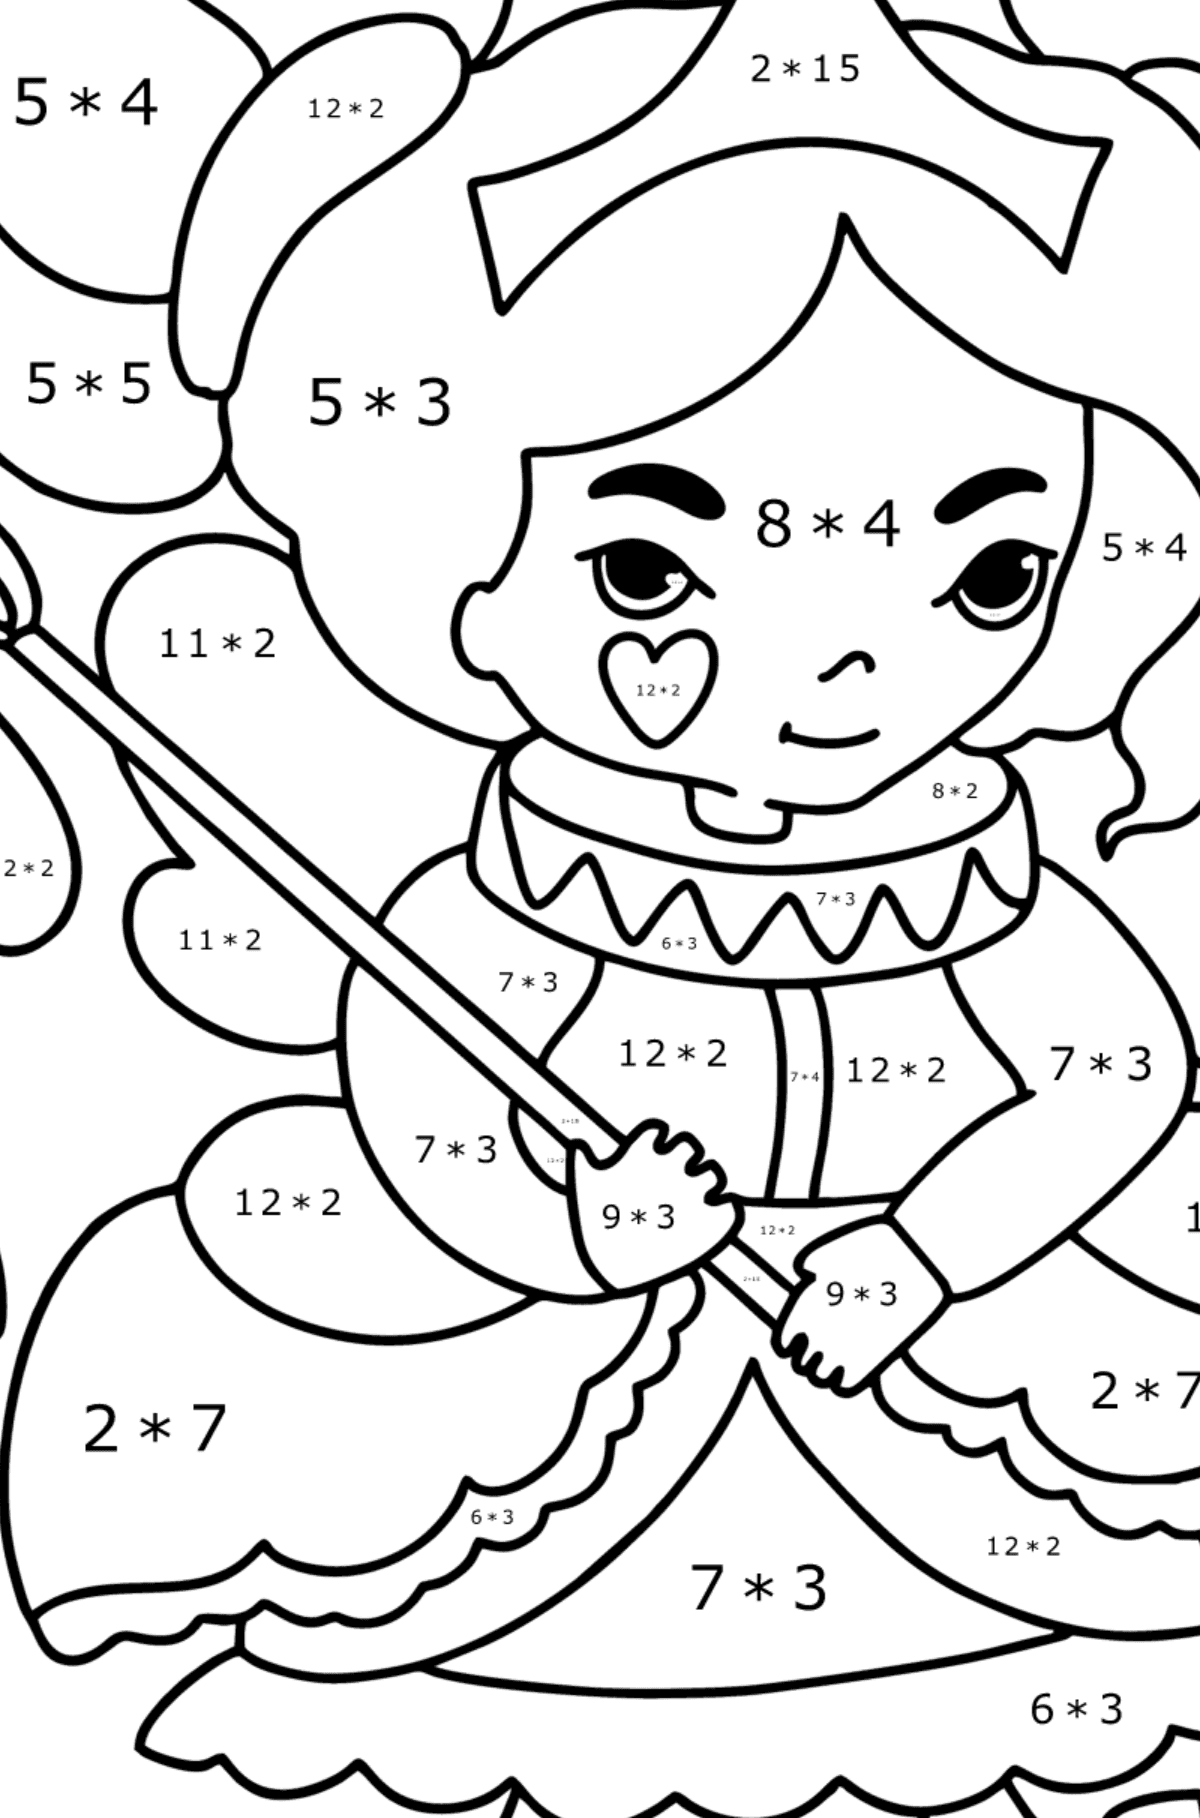 Fairy in a beautiful dress coloring page - Math Coloring - Multiplication for Kids